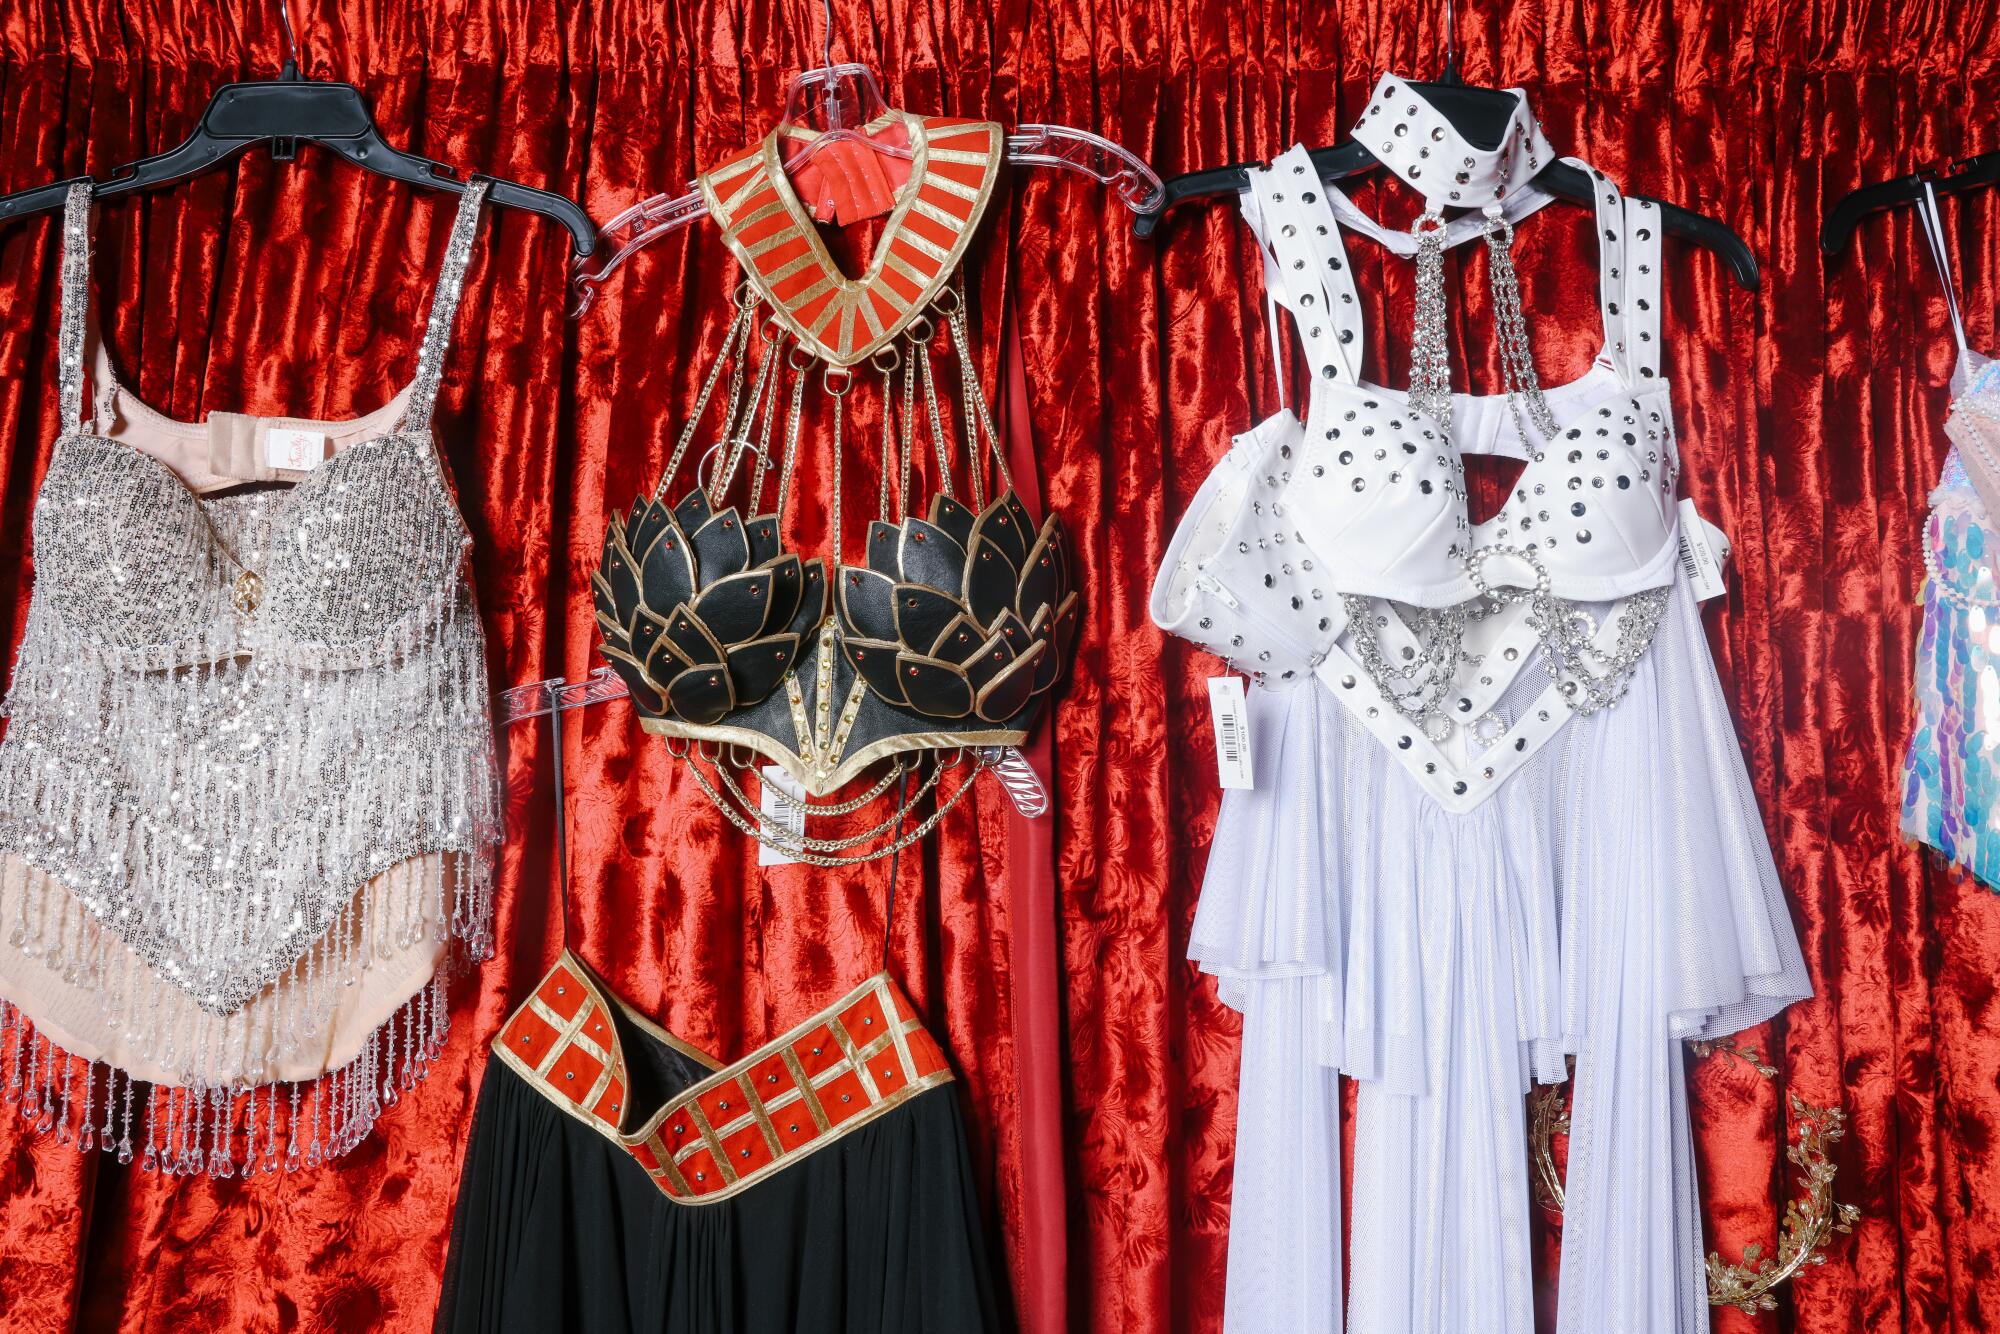 Three costumes from Trashy Lingerie hang on a wall against a red velvet curtain.